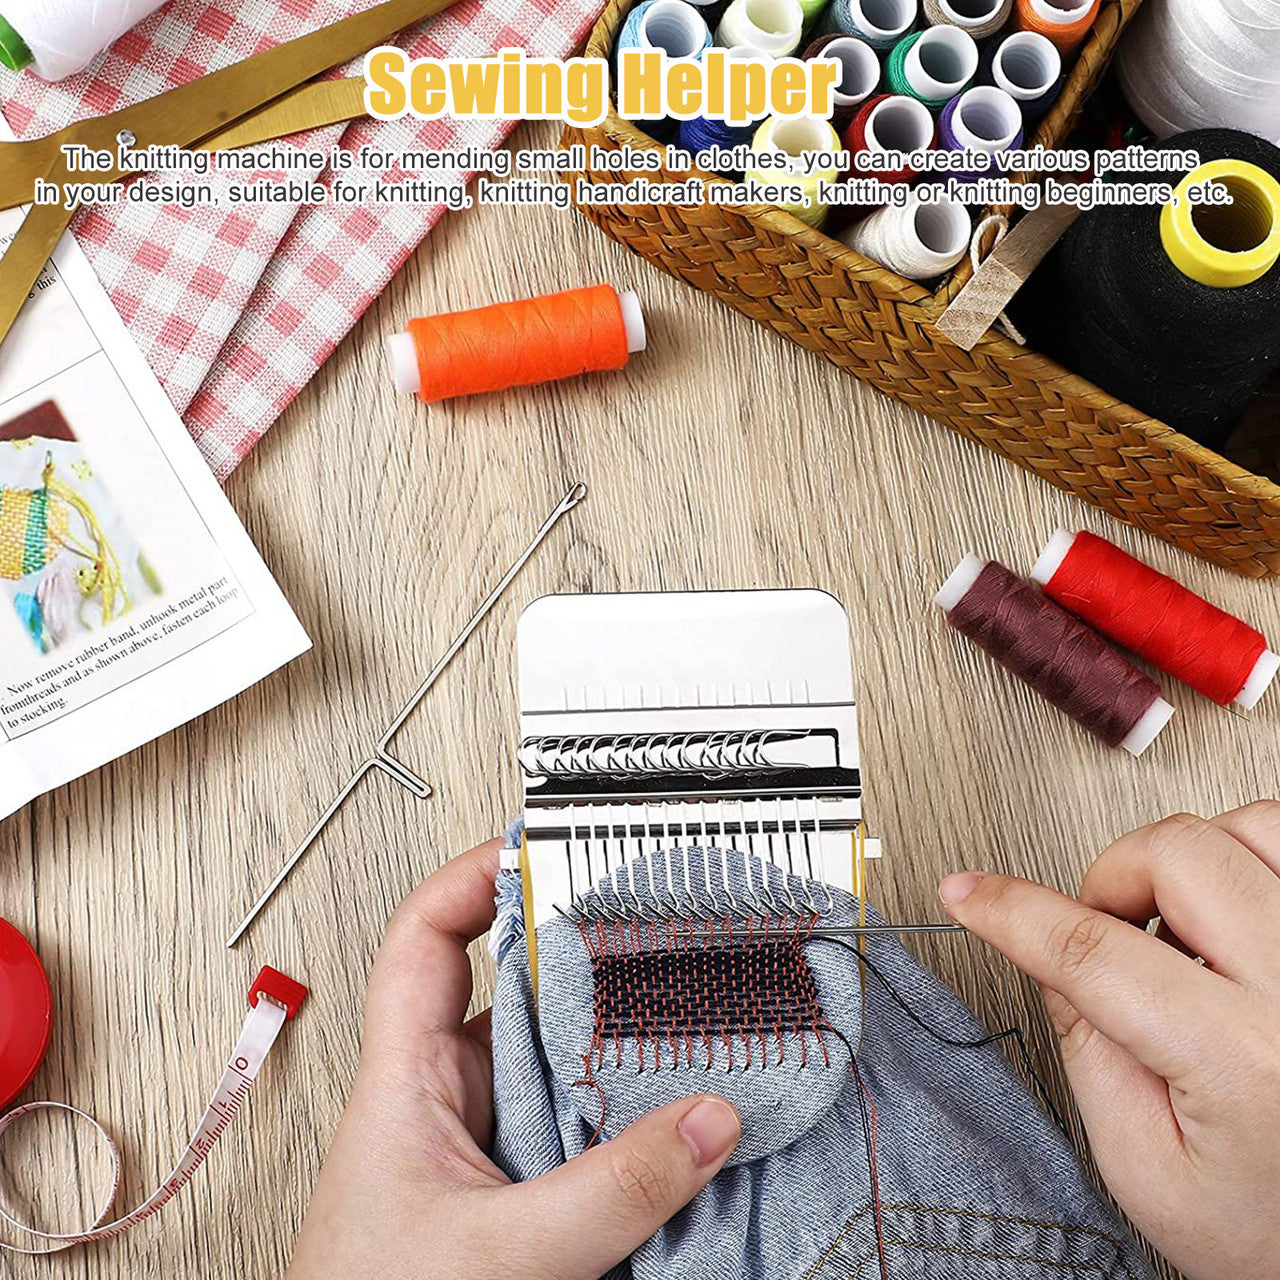 Small Knitting Machine Tools for Easy DIY Knitting Designs and Great as a Sewing Helper